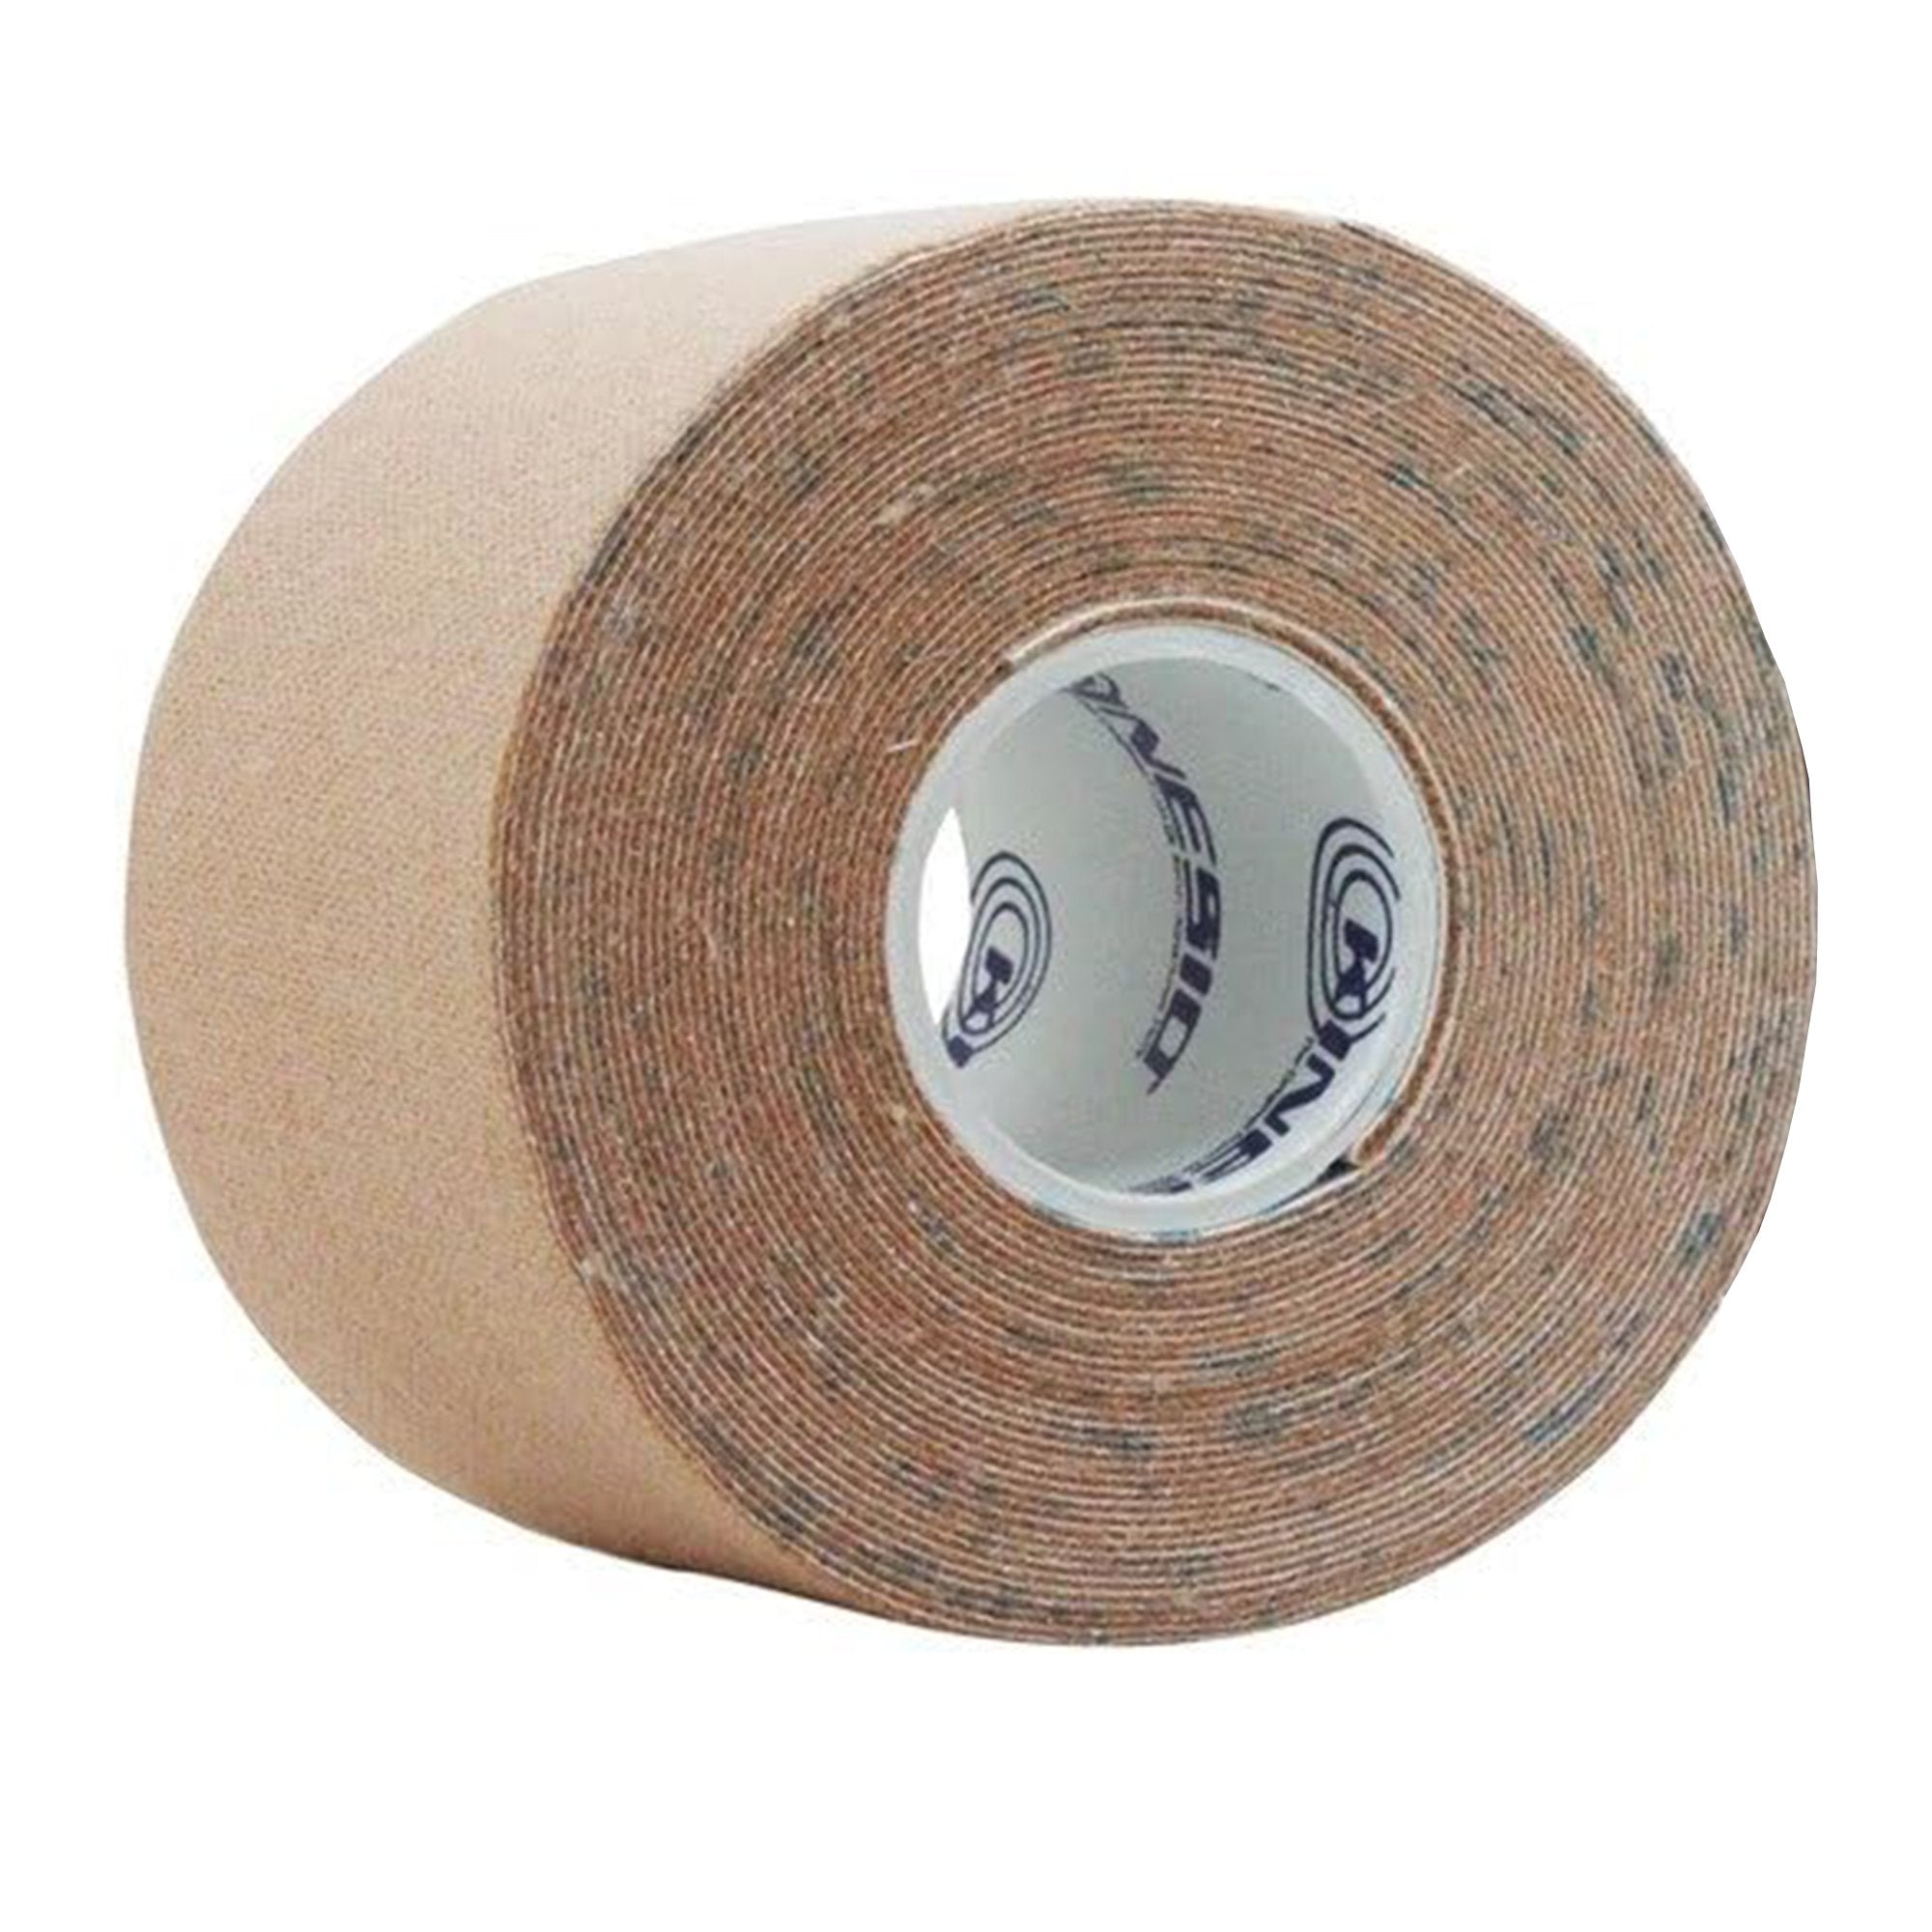 Kinesiology Tape Kinesio® Tex Gold™ FP Beige 2 Inch X 5-1/2 Yard Cotton NonSterile